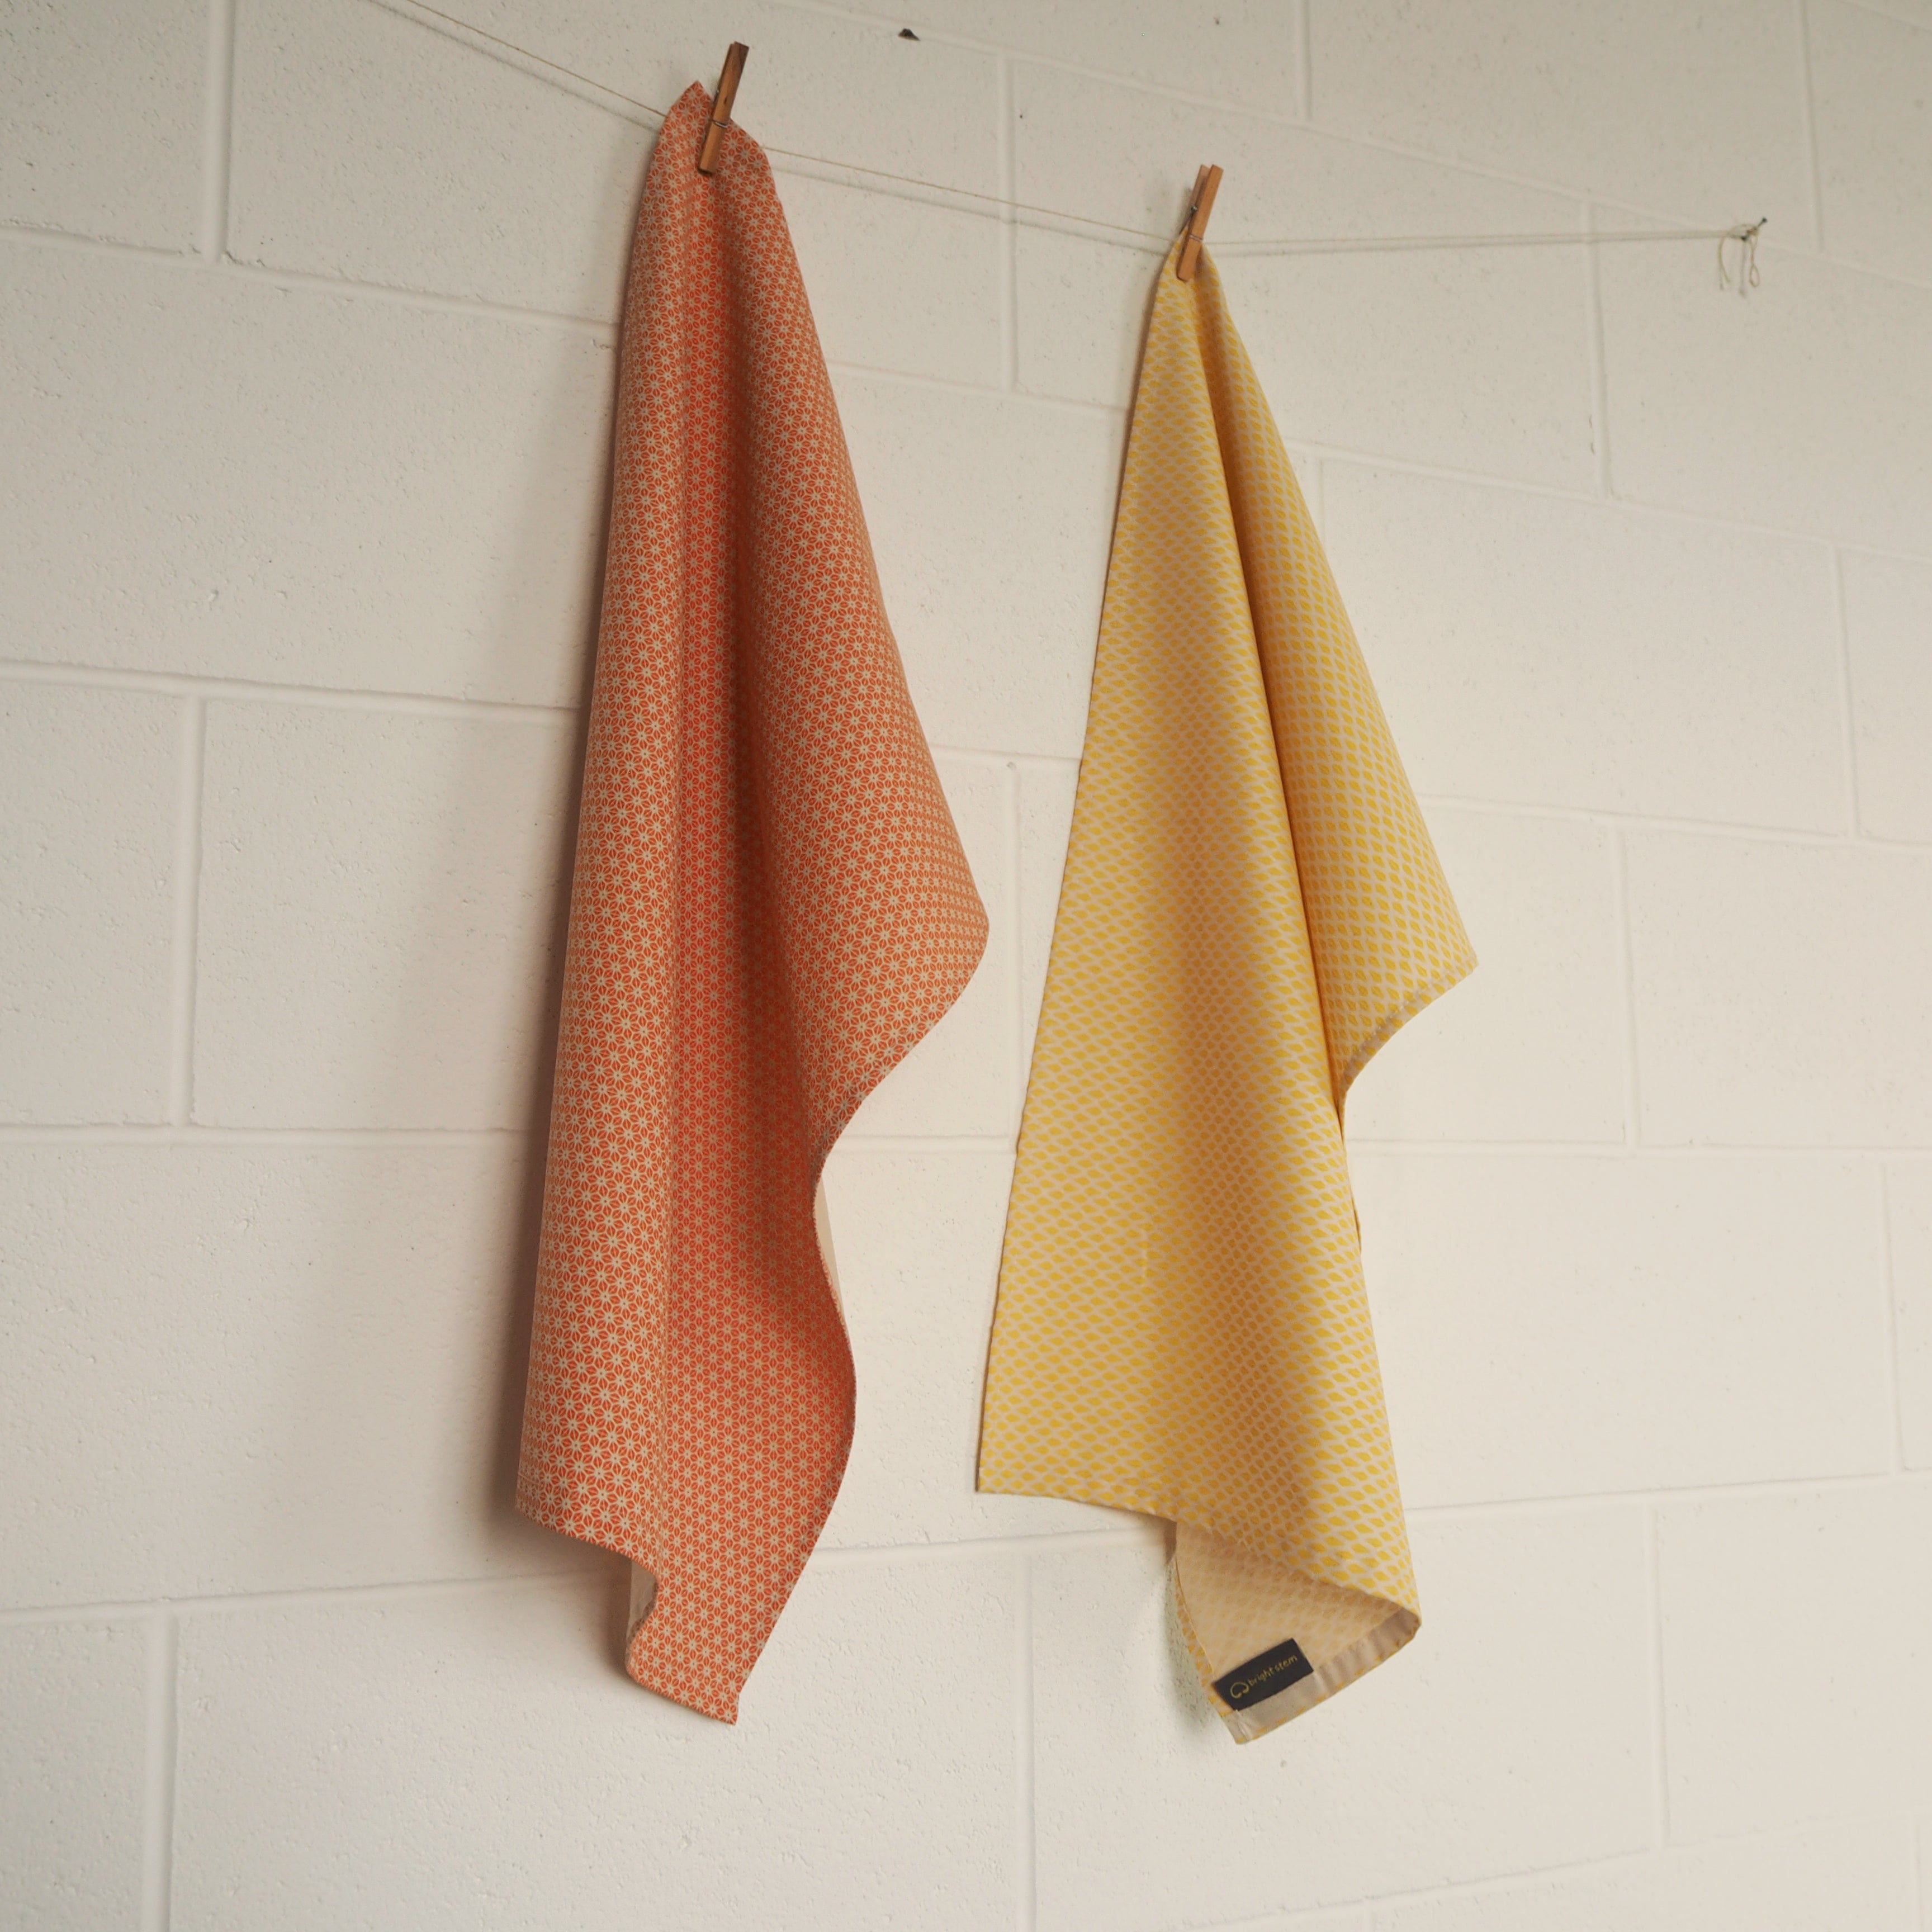 two bright stem tea towels with yellow triangle and orange star pattern printed with water based ink on organic cotton